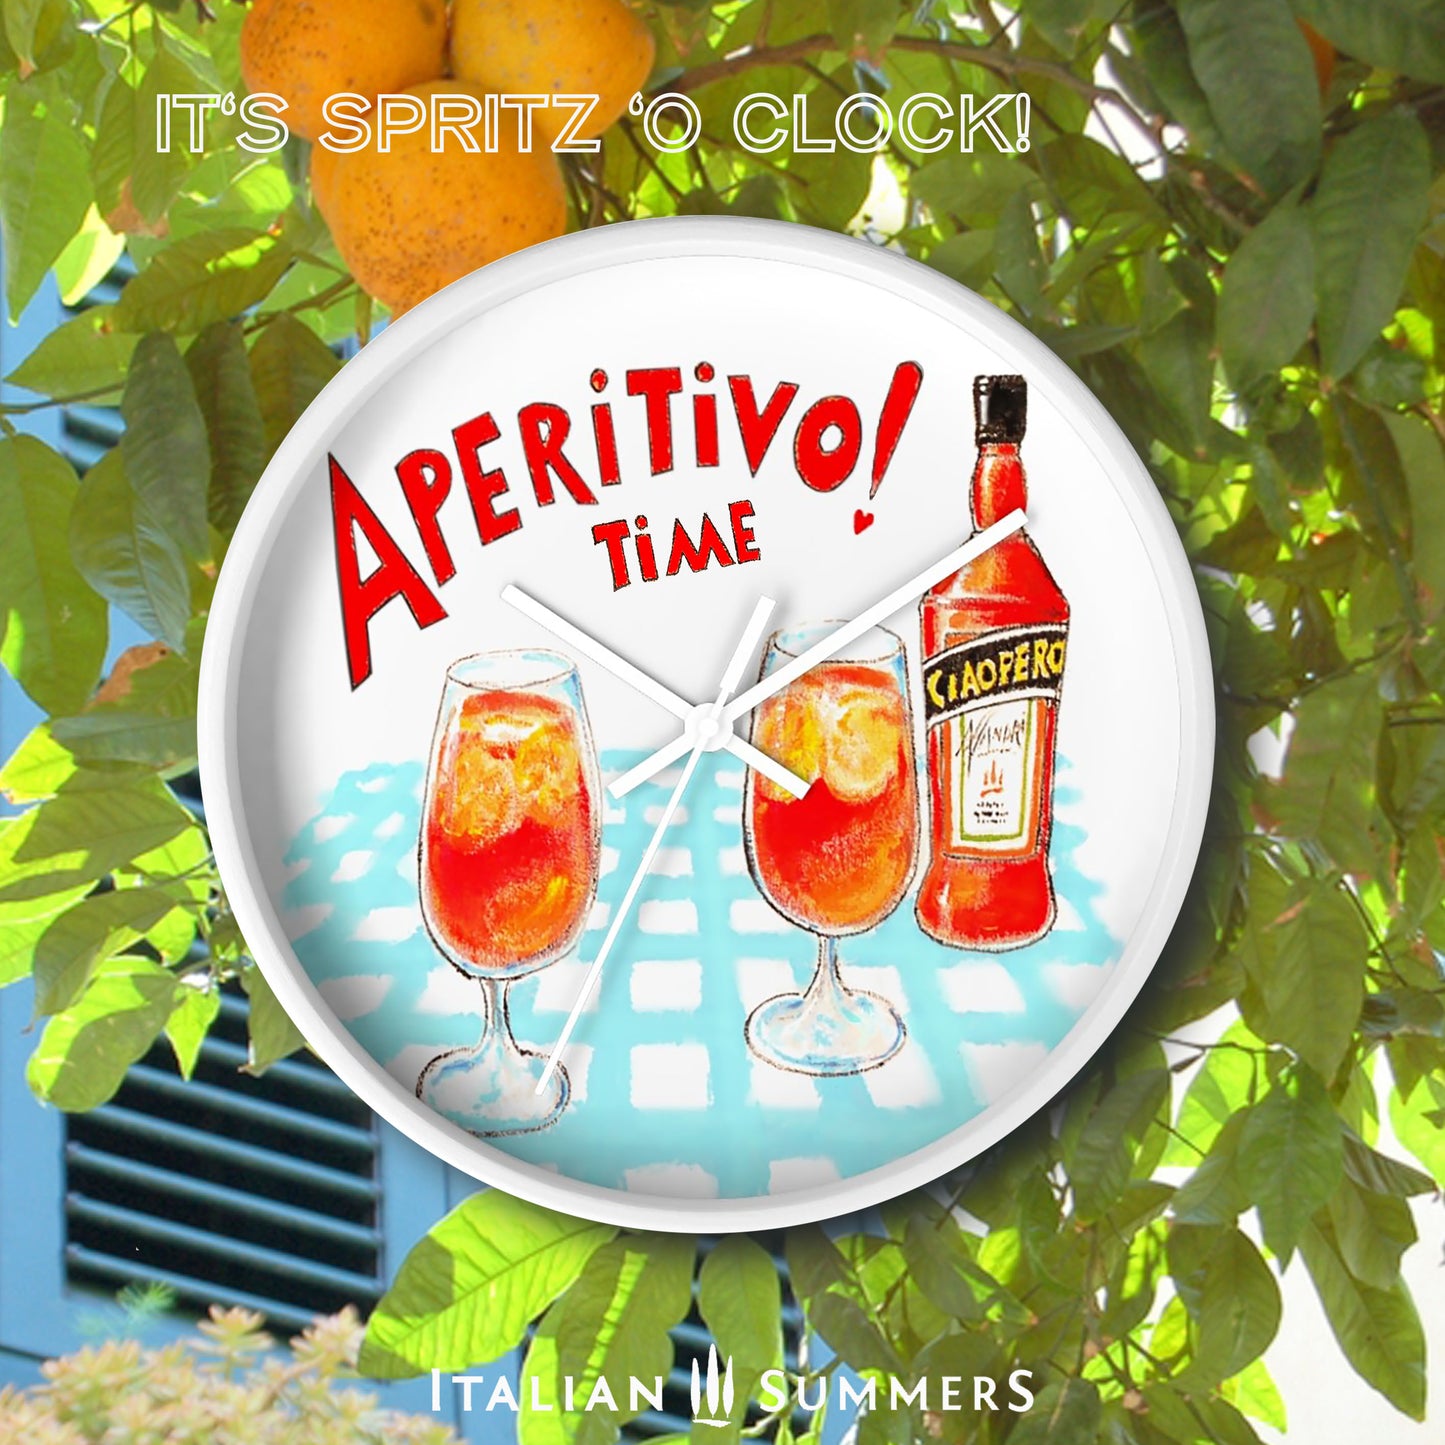 An Italy inspired  rond clock with a print of Two glasses and a bottle of Aperol, whizh is called in the sketch Ciaoperol. The bottle and the foot glasses are standing on a light blue checkered table cloth. There is on top of the sketch the text 'Aperitivo time!' in a vintage red color, handwritten font. Made by Italian Summers